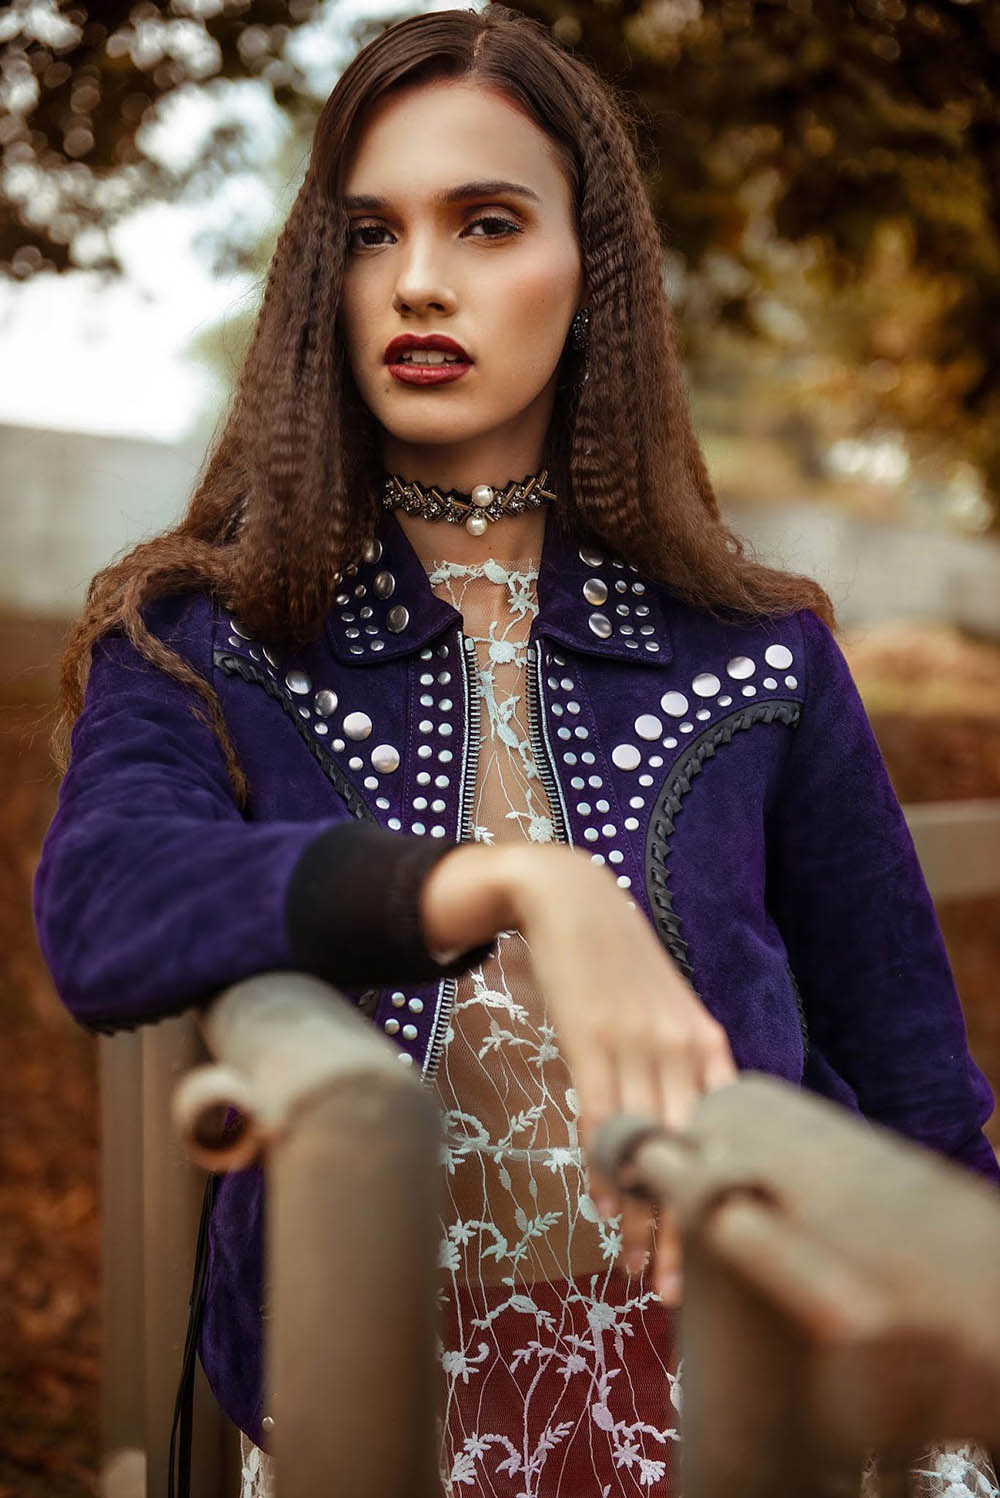 Erika Kolani by Grego Gery for Marie Claire Indonesia October 2018